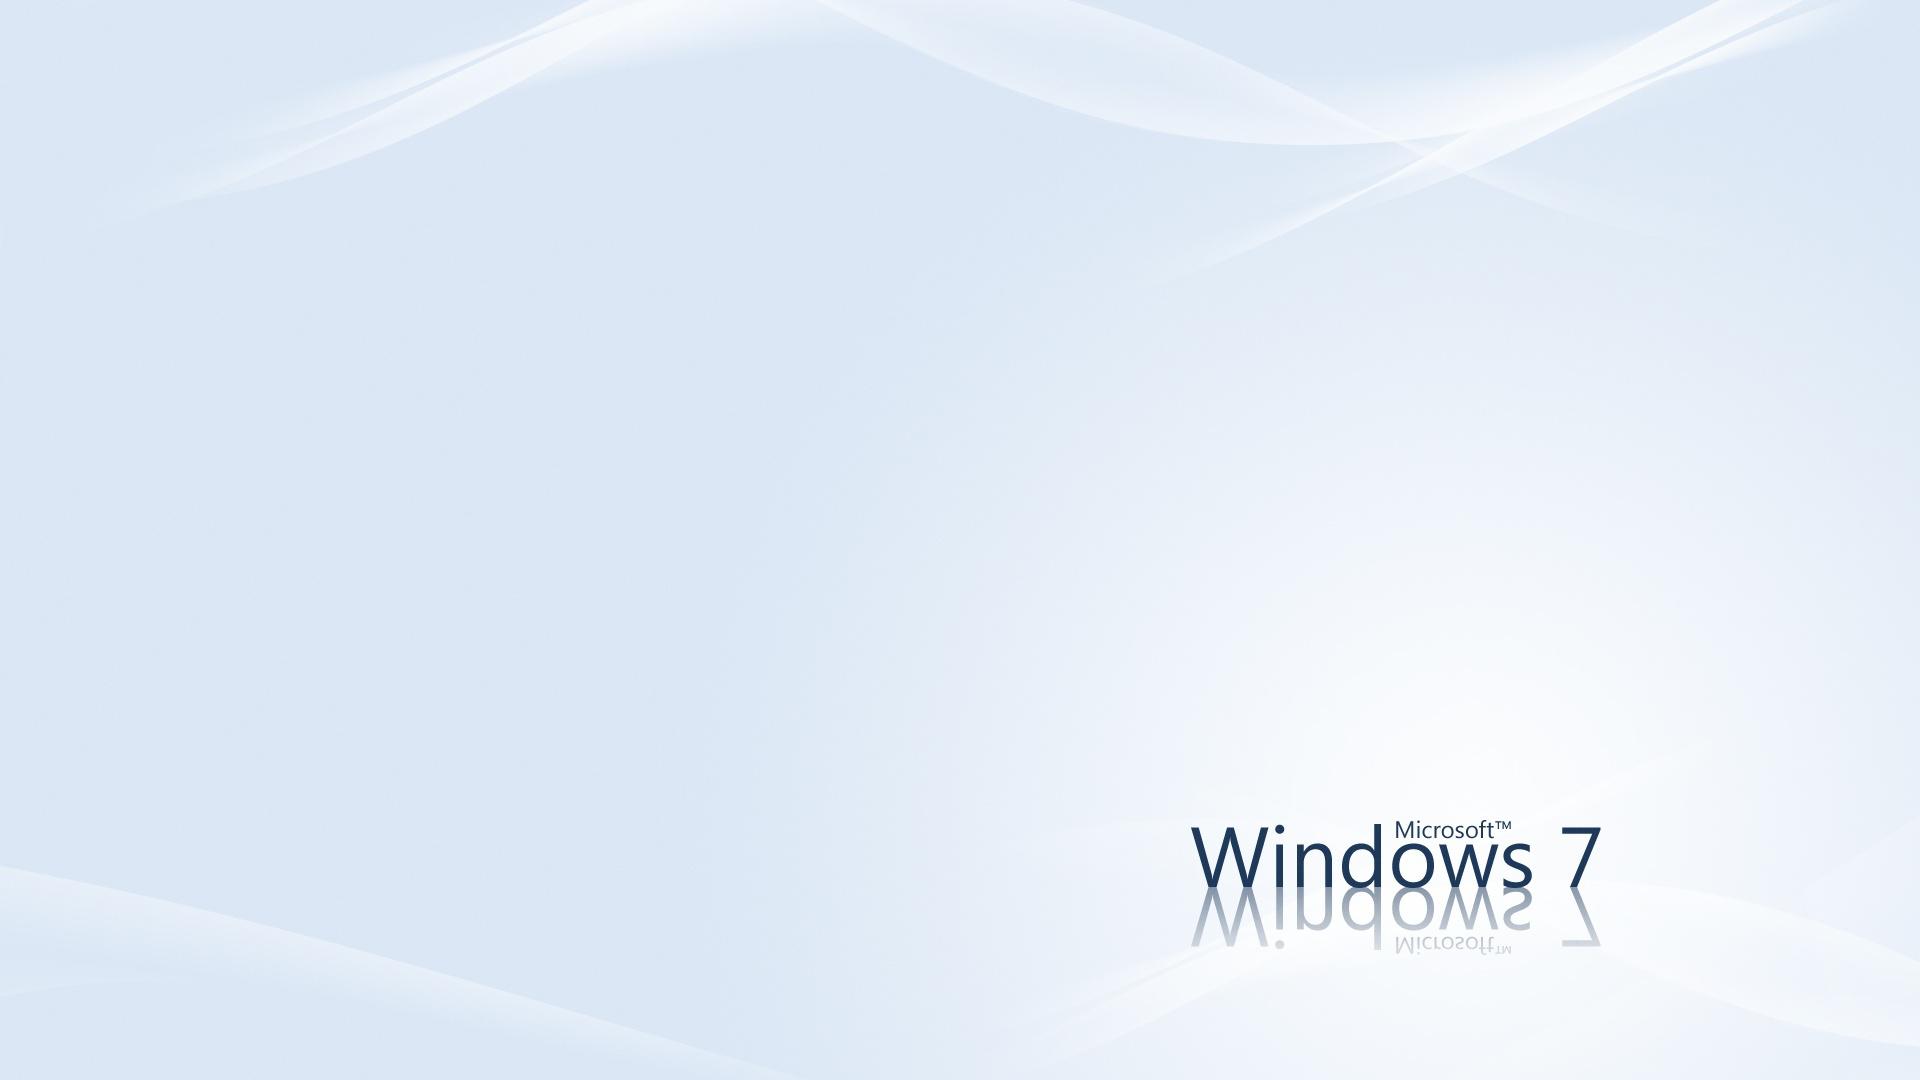 Windows 7 white - (#100118) - High Quality and Resolution ...